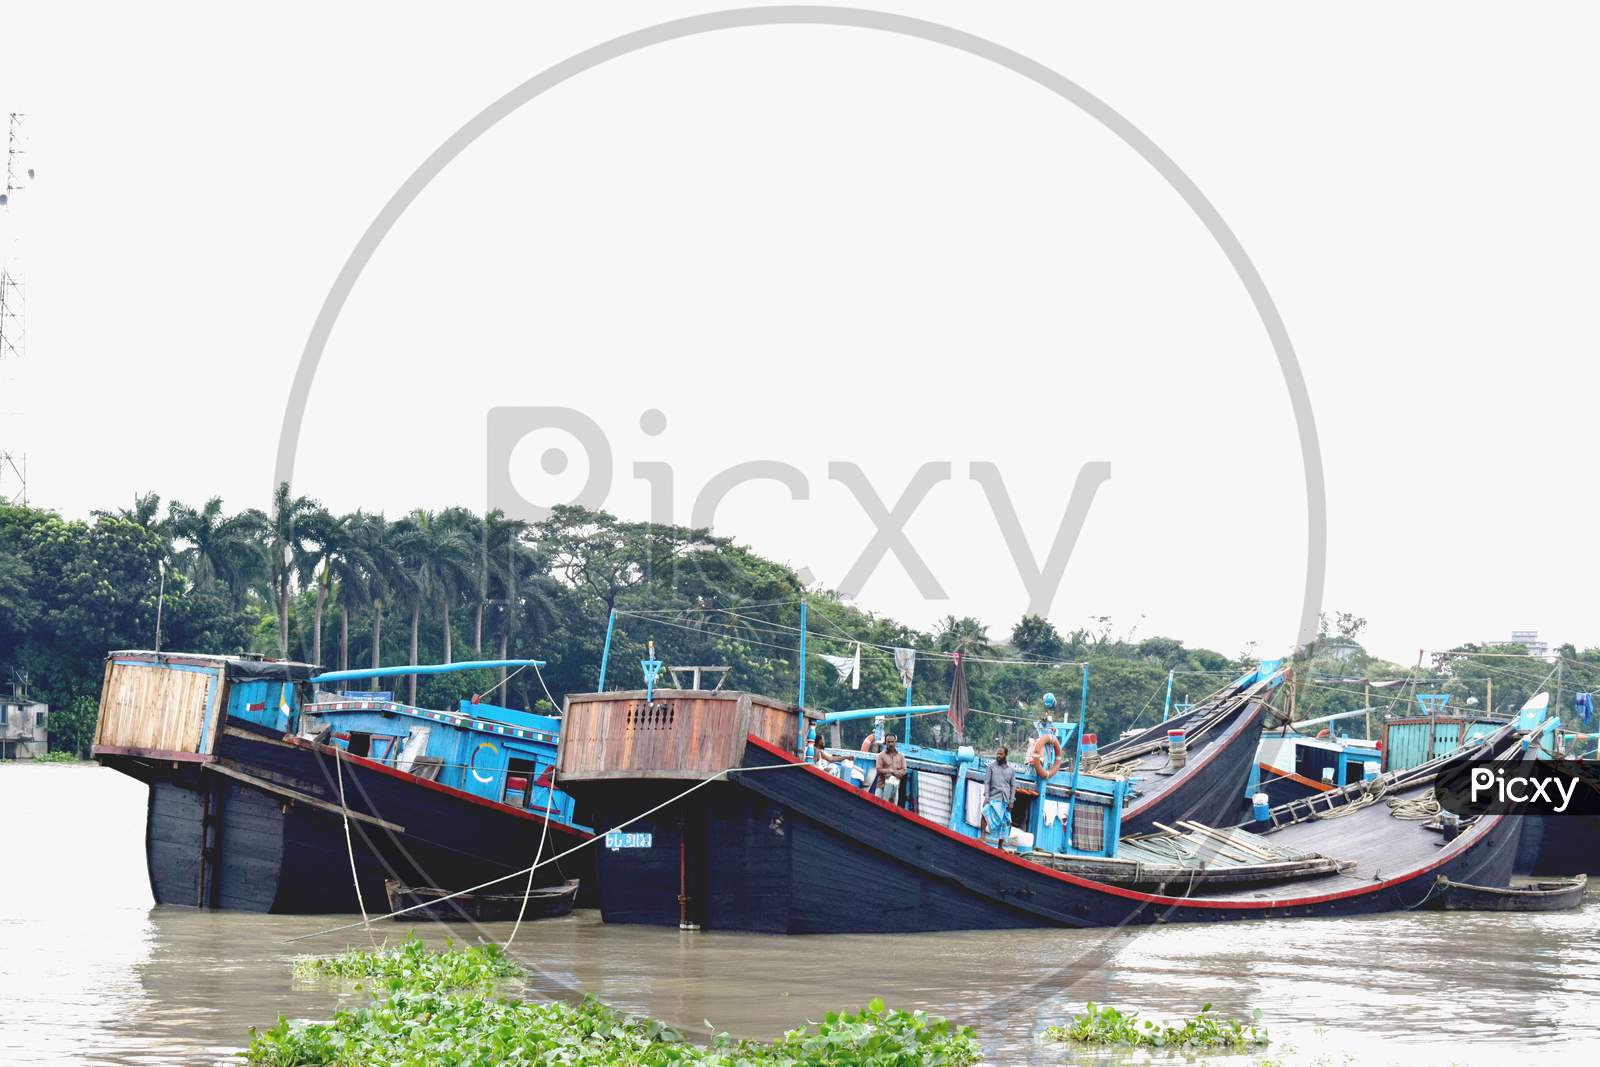 River Side Local People Lifestyle,River View, Traditional Small Boat With Cloudy Sky .The Photo Was Taken From Shitolokkha River, Narayanganj,Rupgonj On 24Th September 2020.